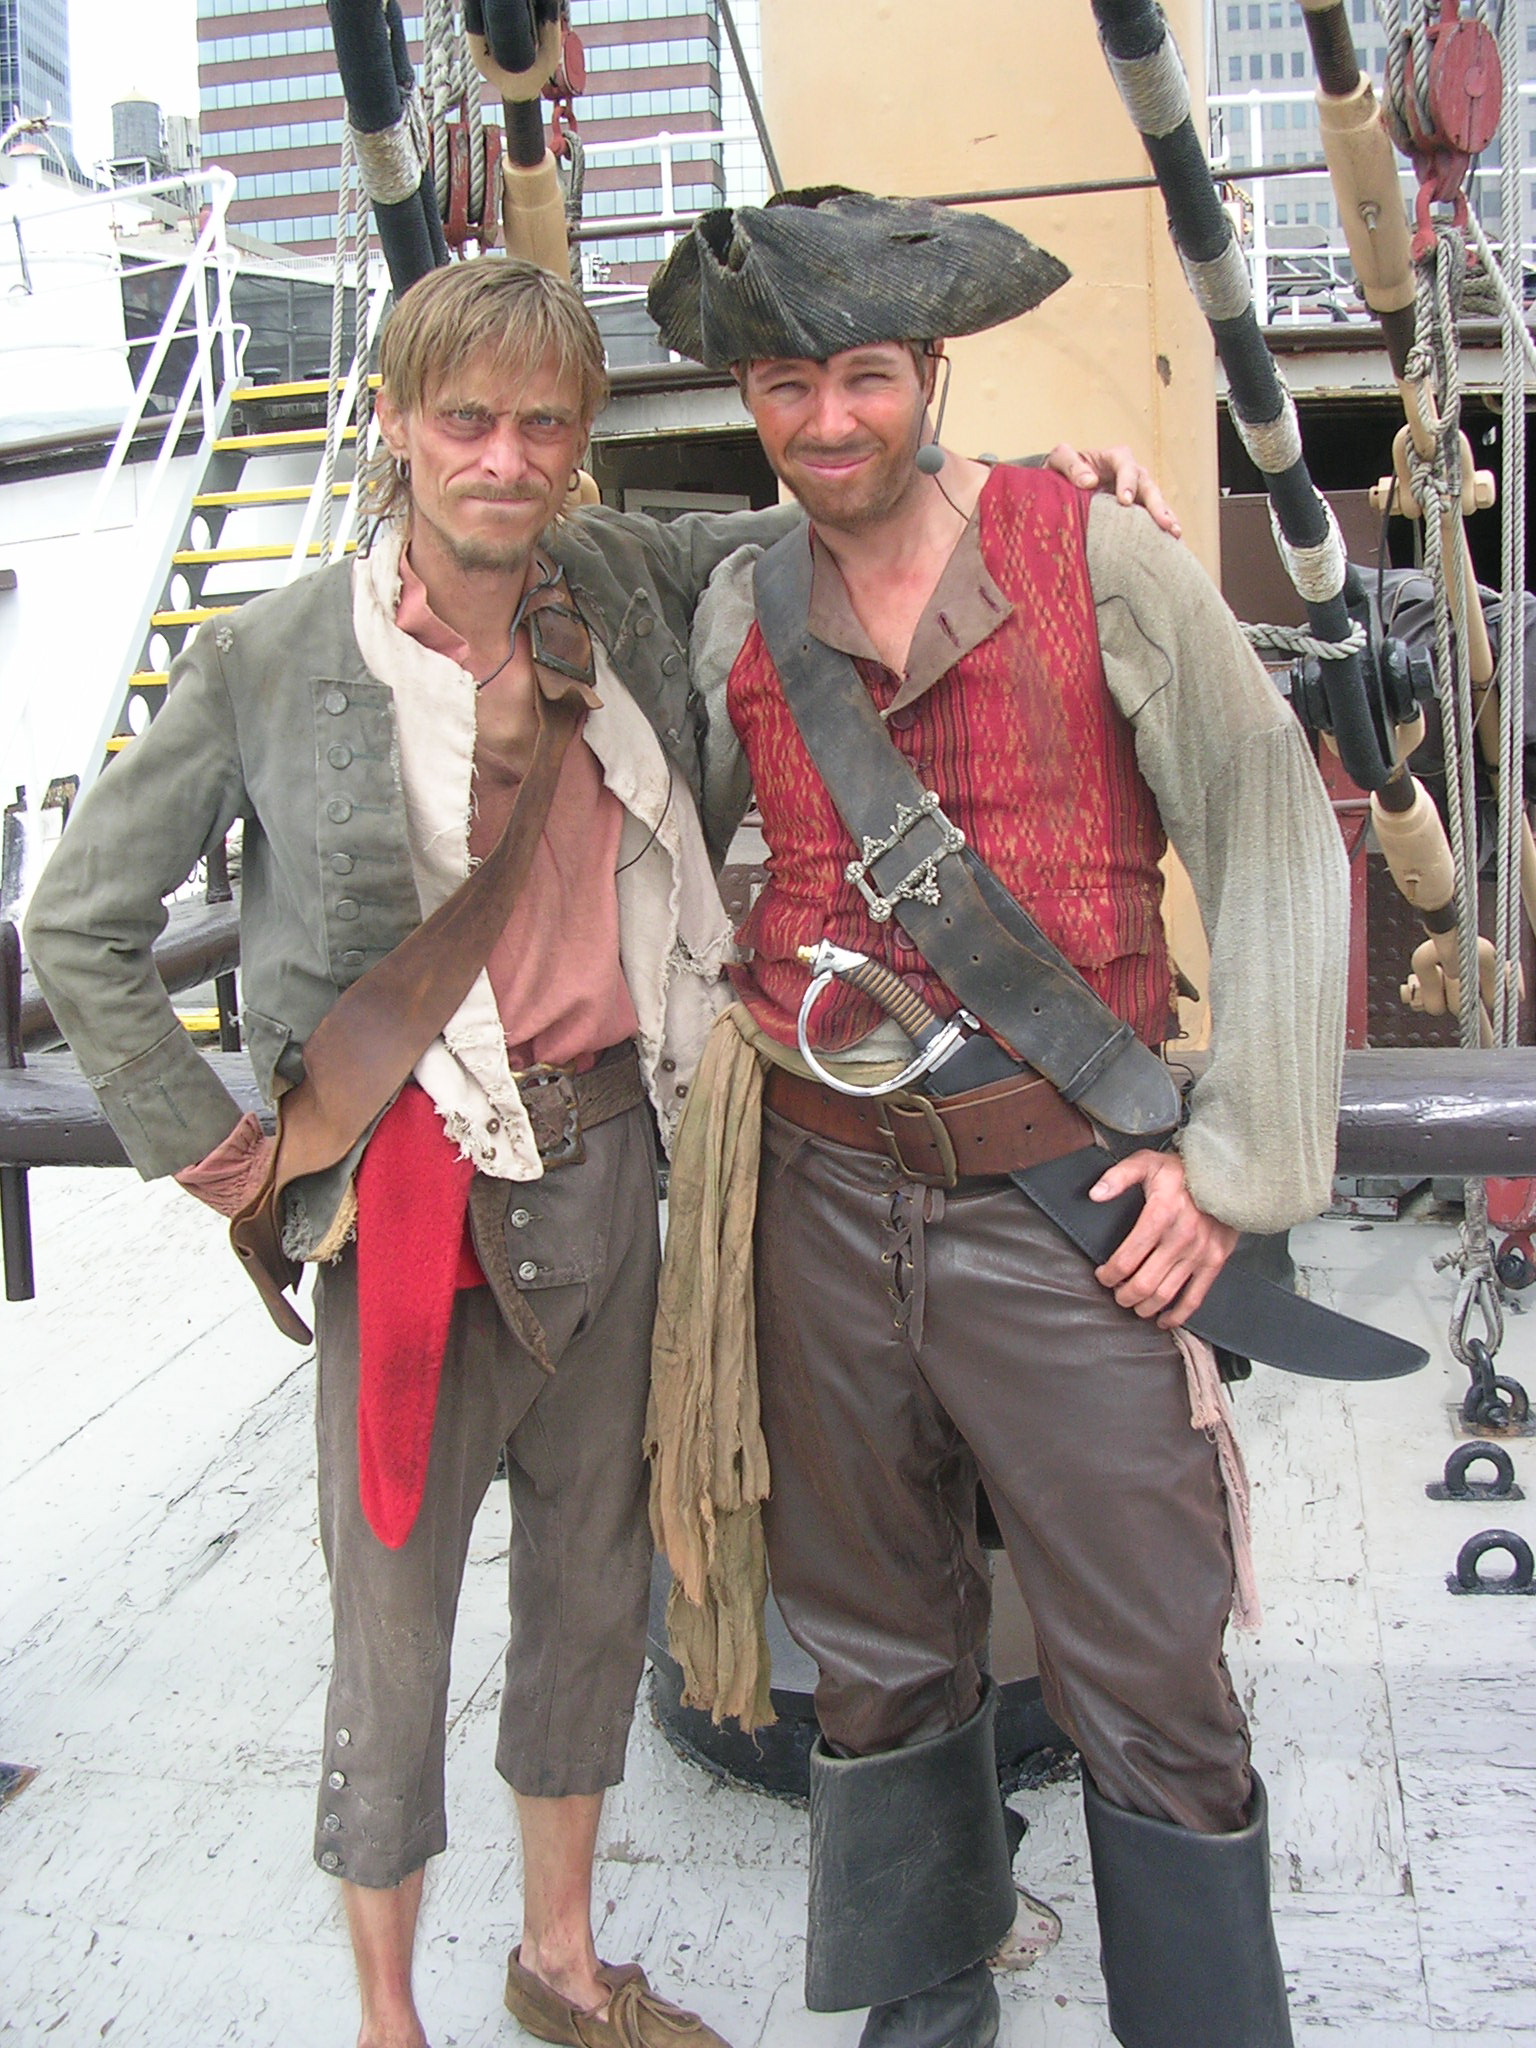 Actor Mackenzie Crook (as Pirate Ragetti) & actor Marc Bonnée (Ragetti's Mate) slash open their new found treasure to reveal White Chocolate M&M'S, called Pirate Pearls. News of the event spread throughout several media outlets a